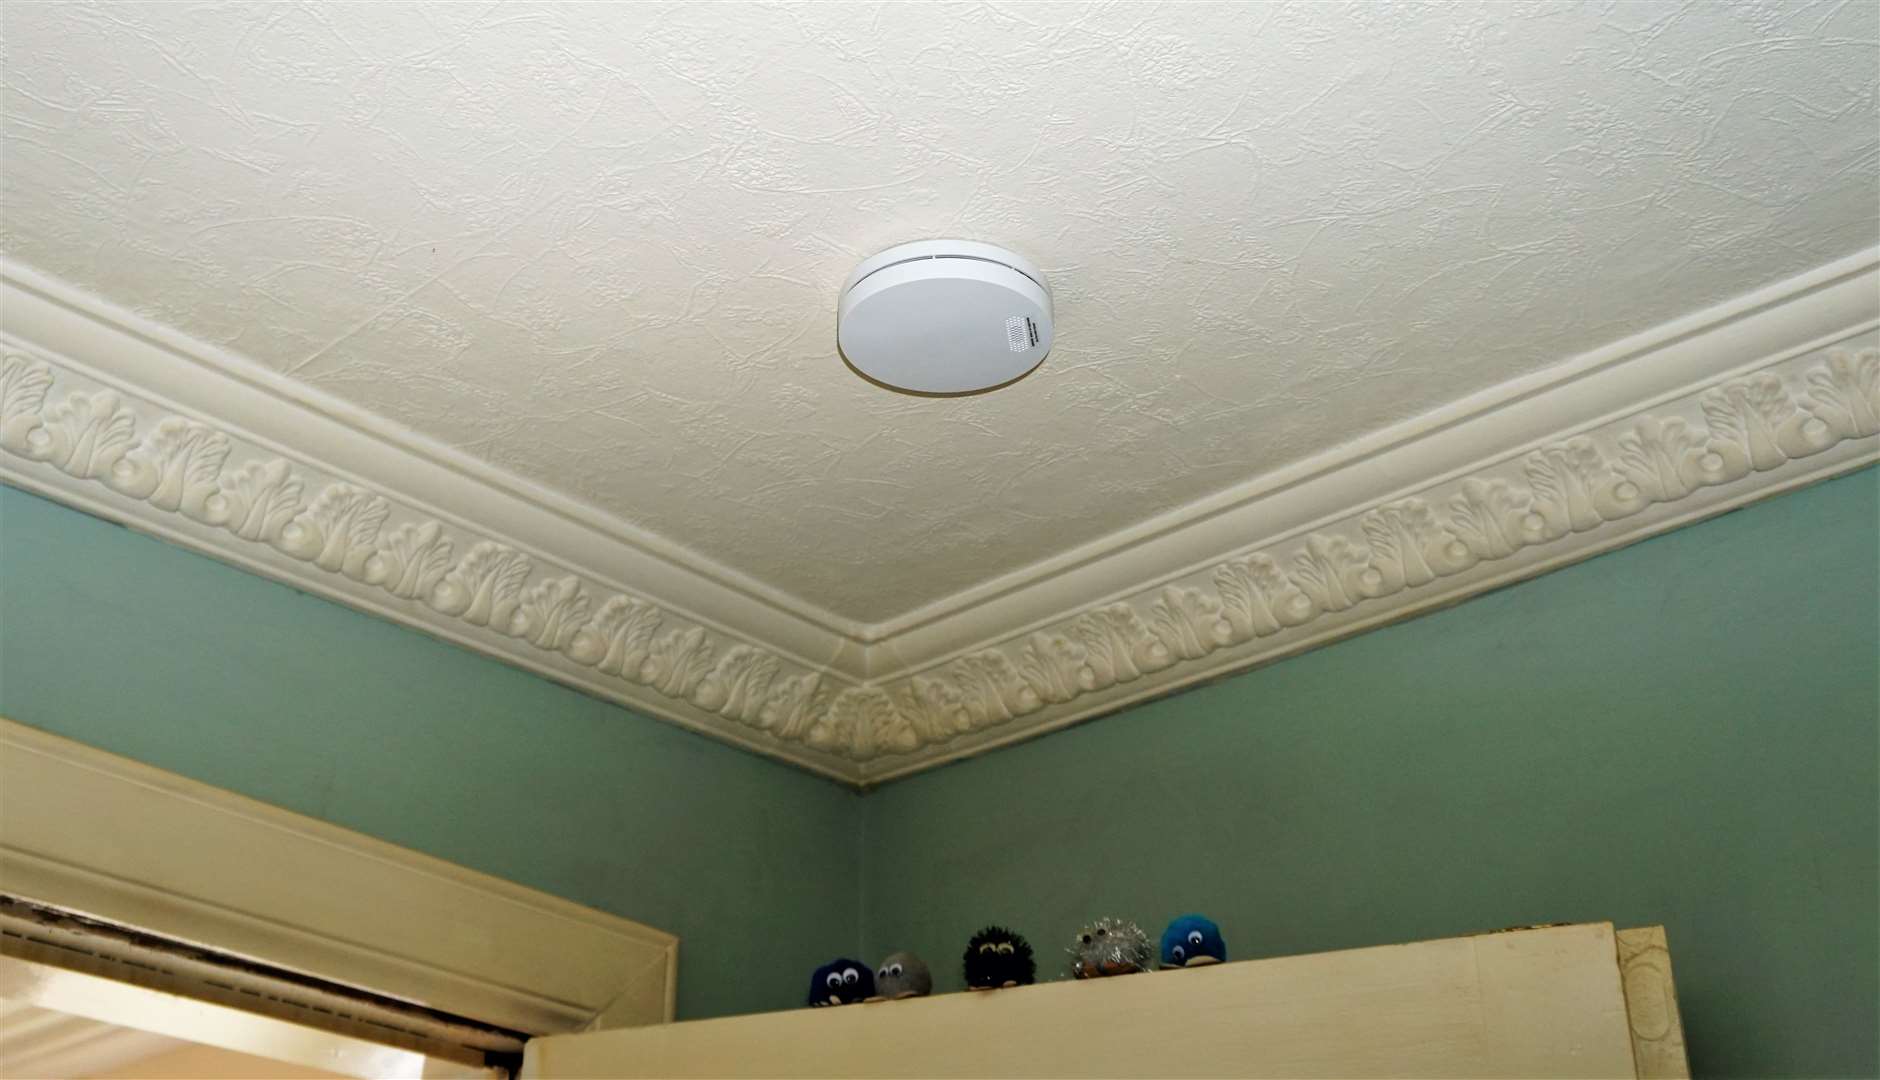 Interlinked smoke alarm recently installed in a Caithness house. Picture: DGS